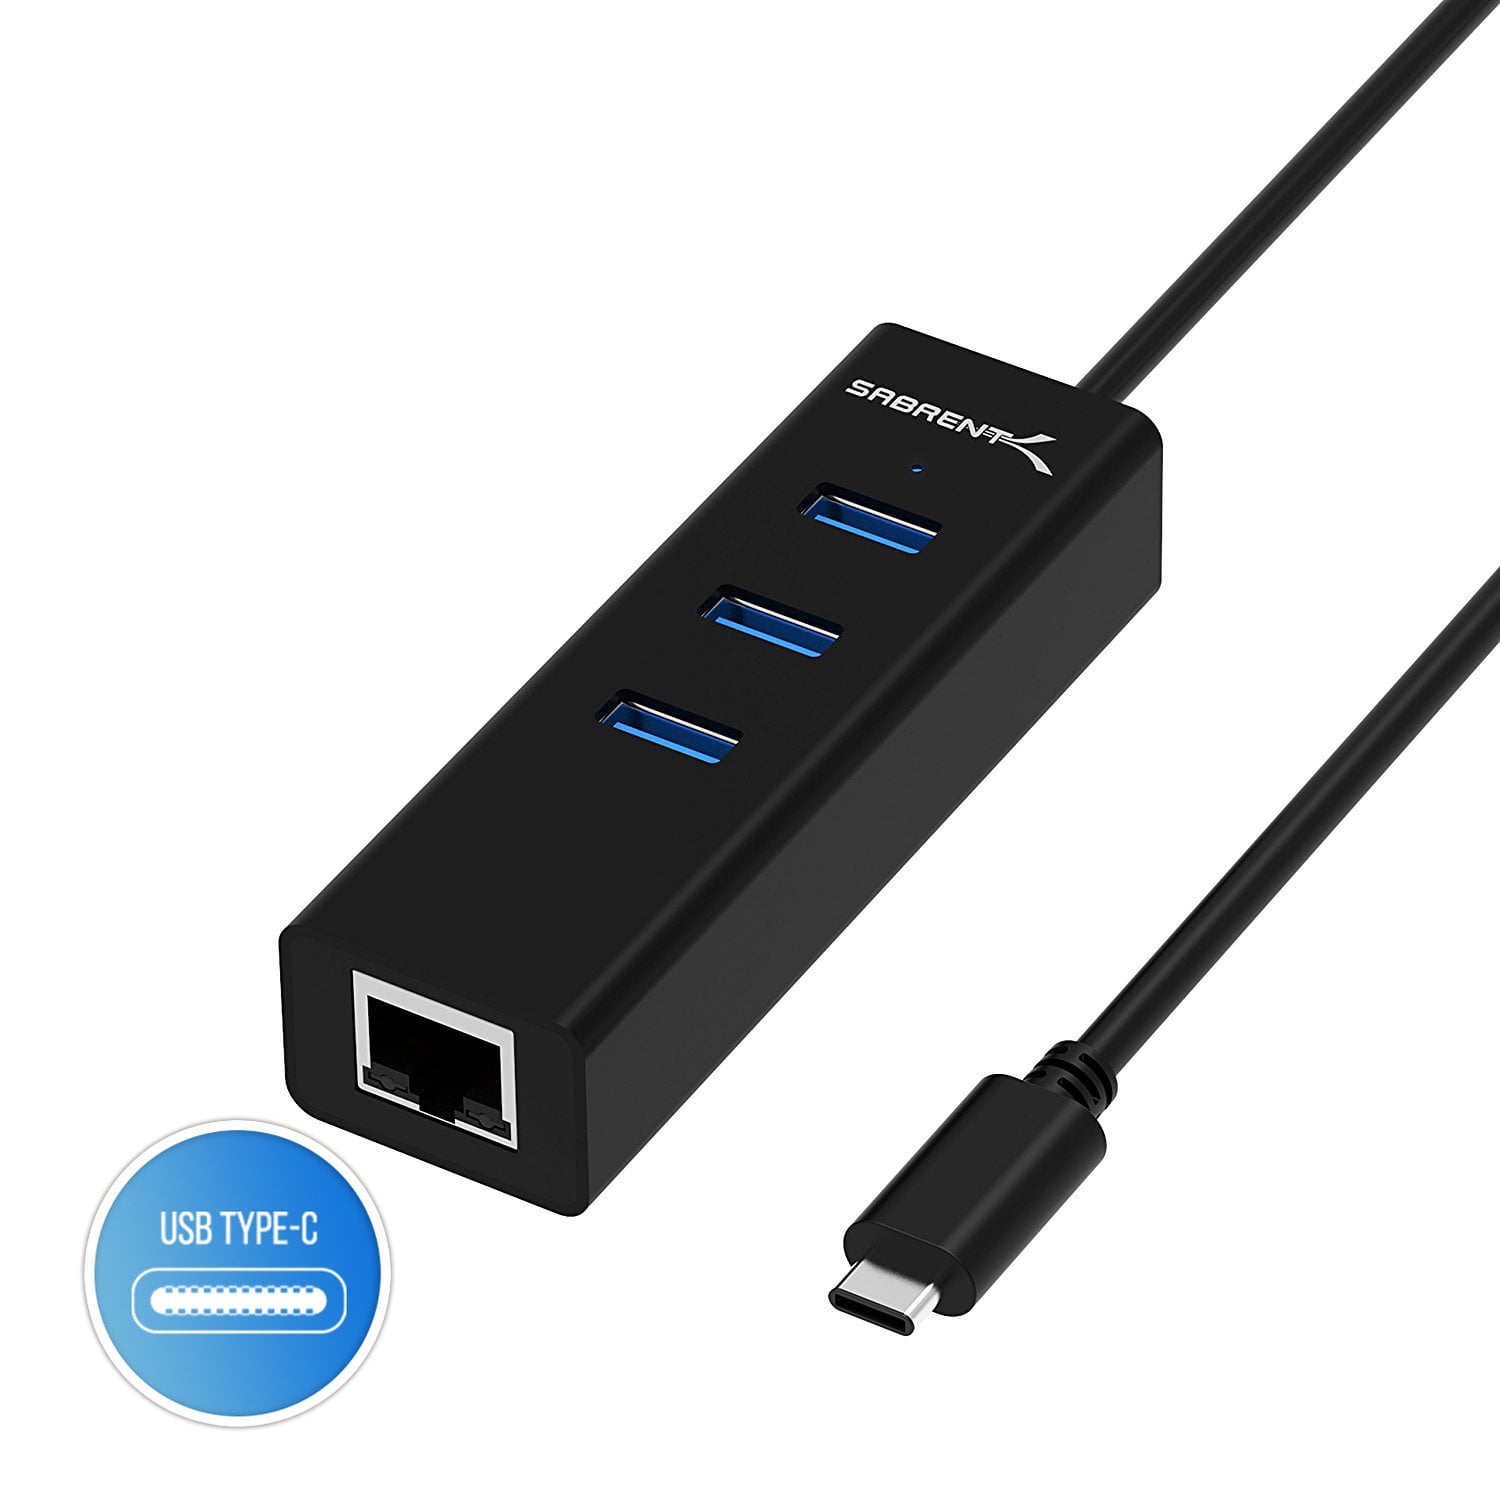 Sabrent 13 Port High Speed USB 2.0 Hub with Power Adapter And 2 